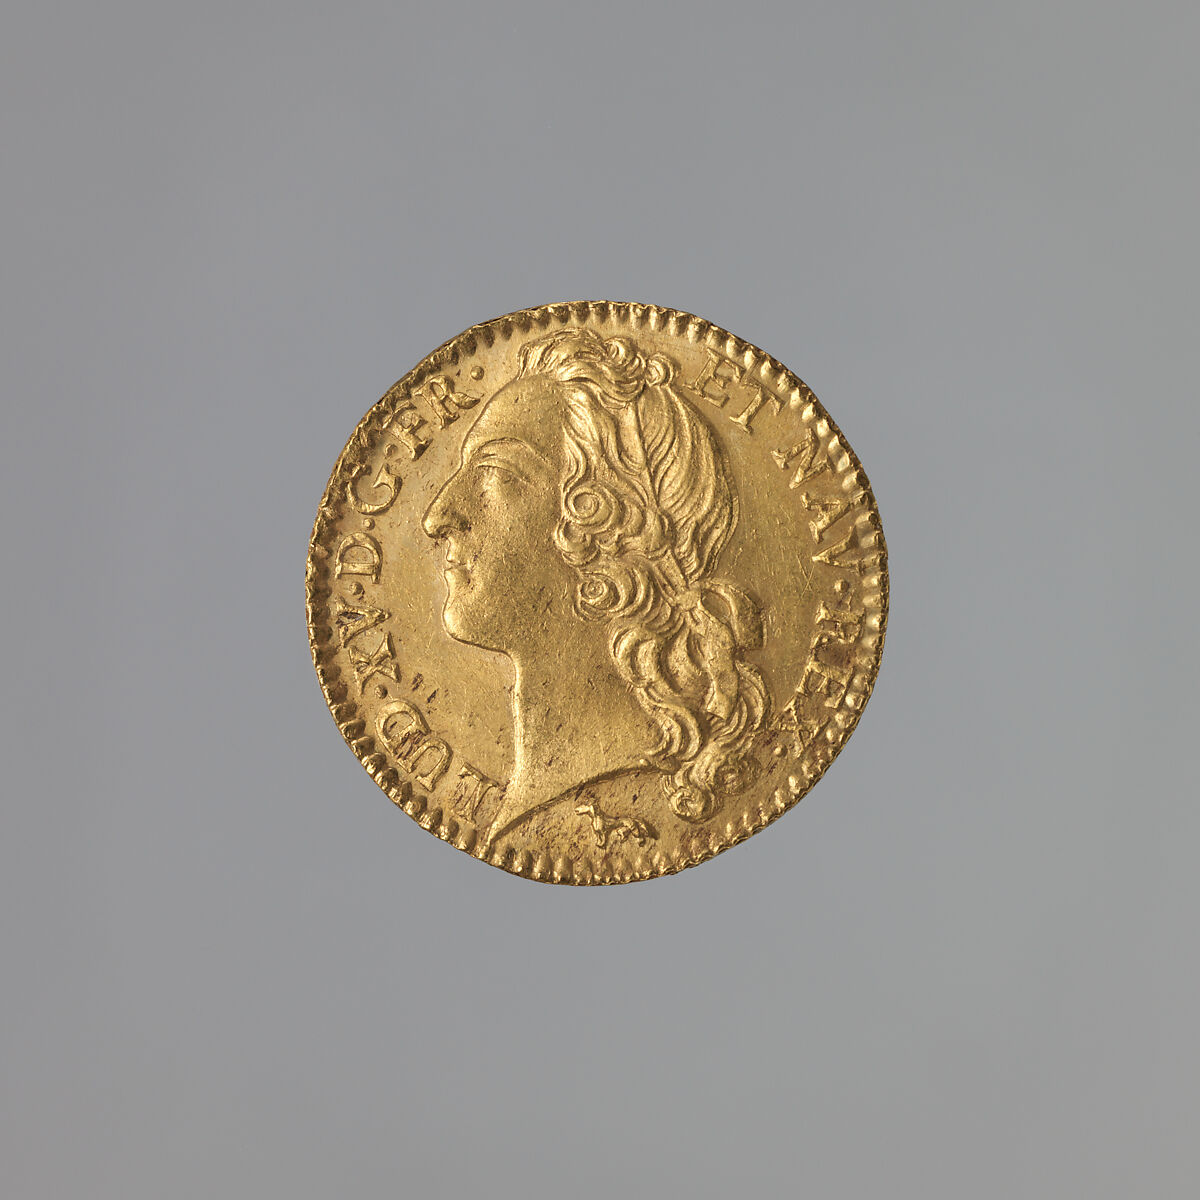 Double Louis d’or of Louis XV of France (b. 1710; r. 1715–74), Joseph-Charles Roettiers (French, Paris 1691–1779 Paris), Gold, French 